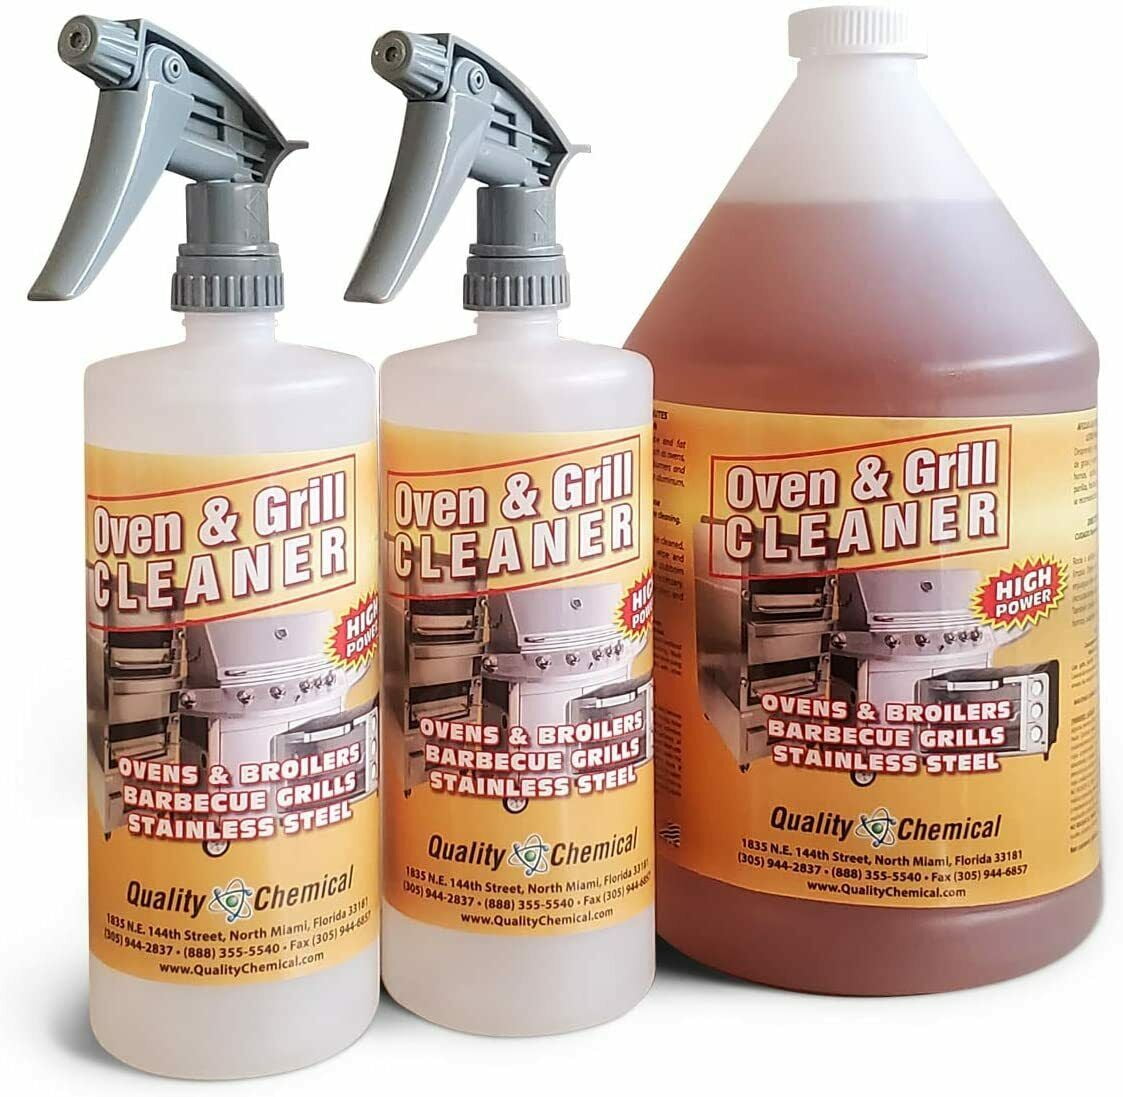 Oven Whiz Concentrated Oven & Grill Cleaner 1 Gal - Incl. 2x Spray